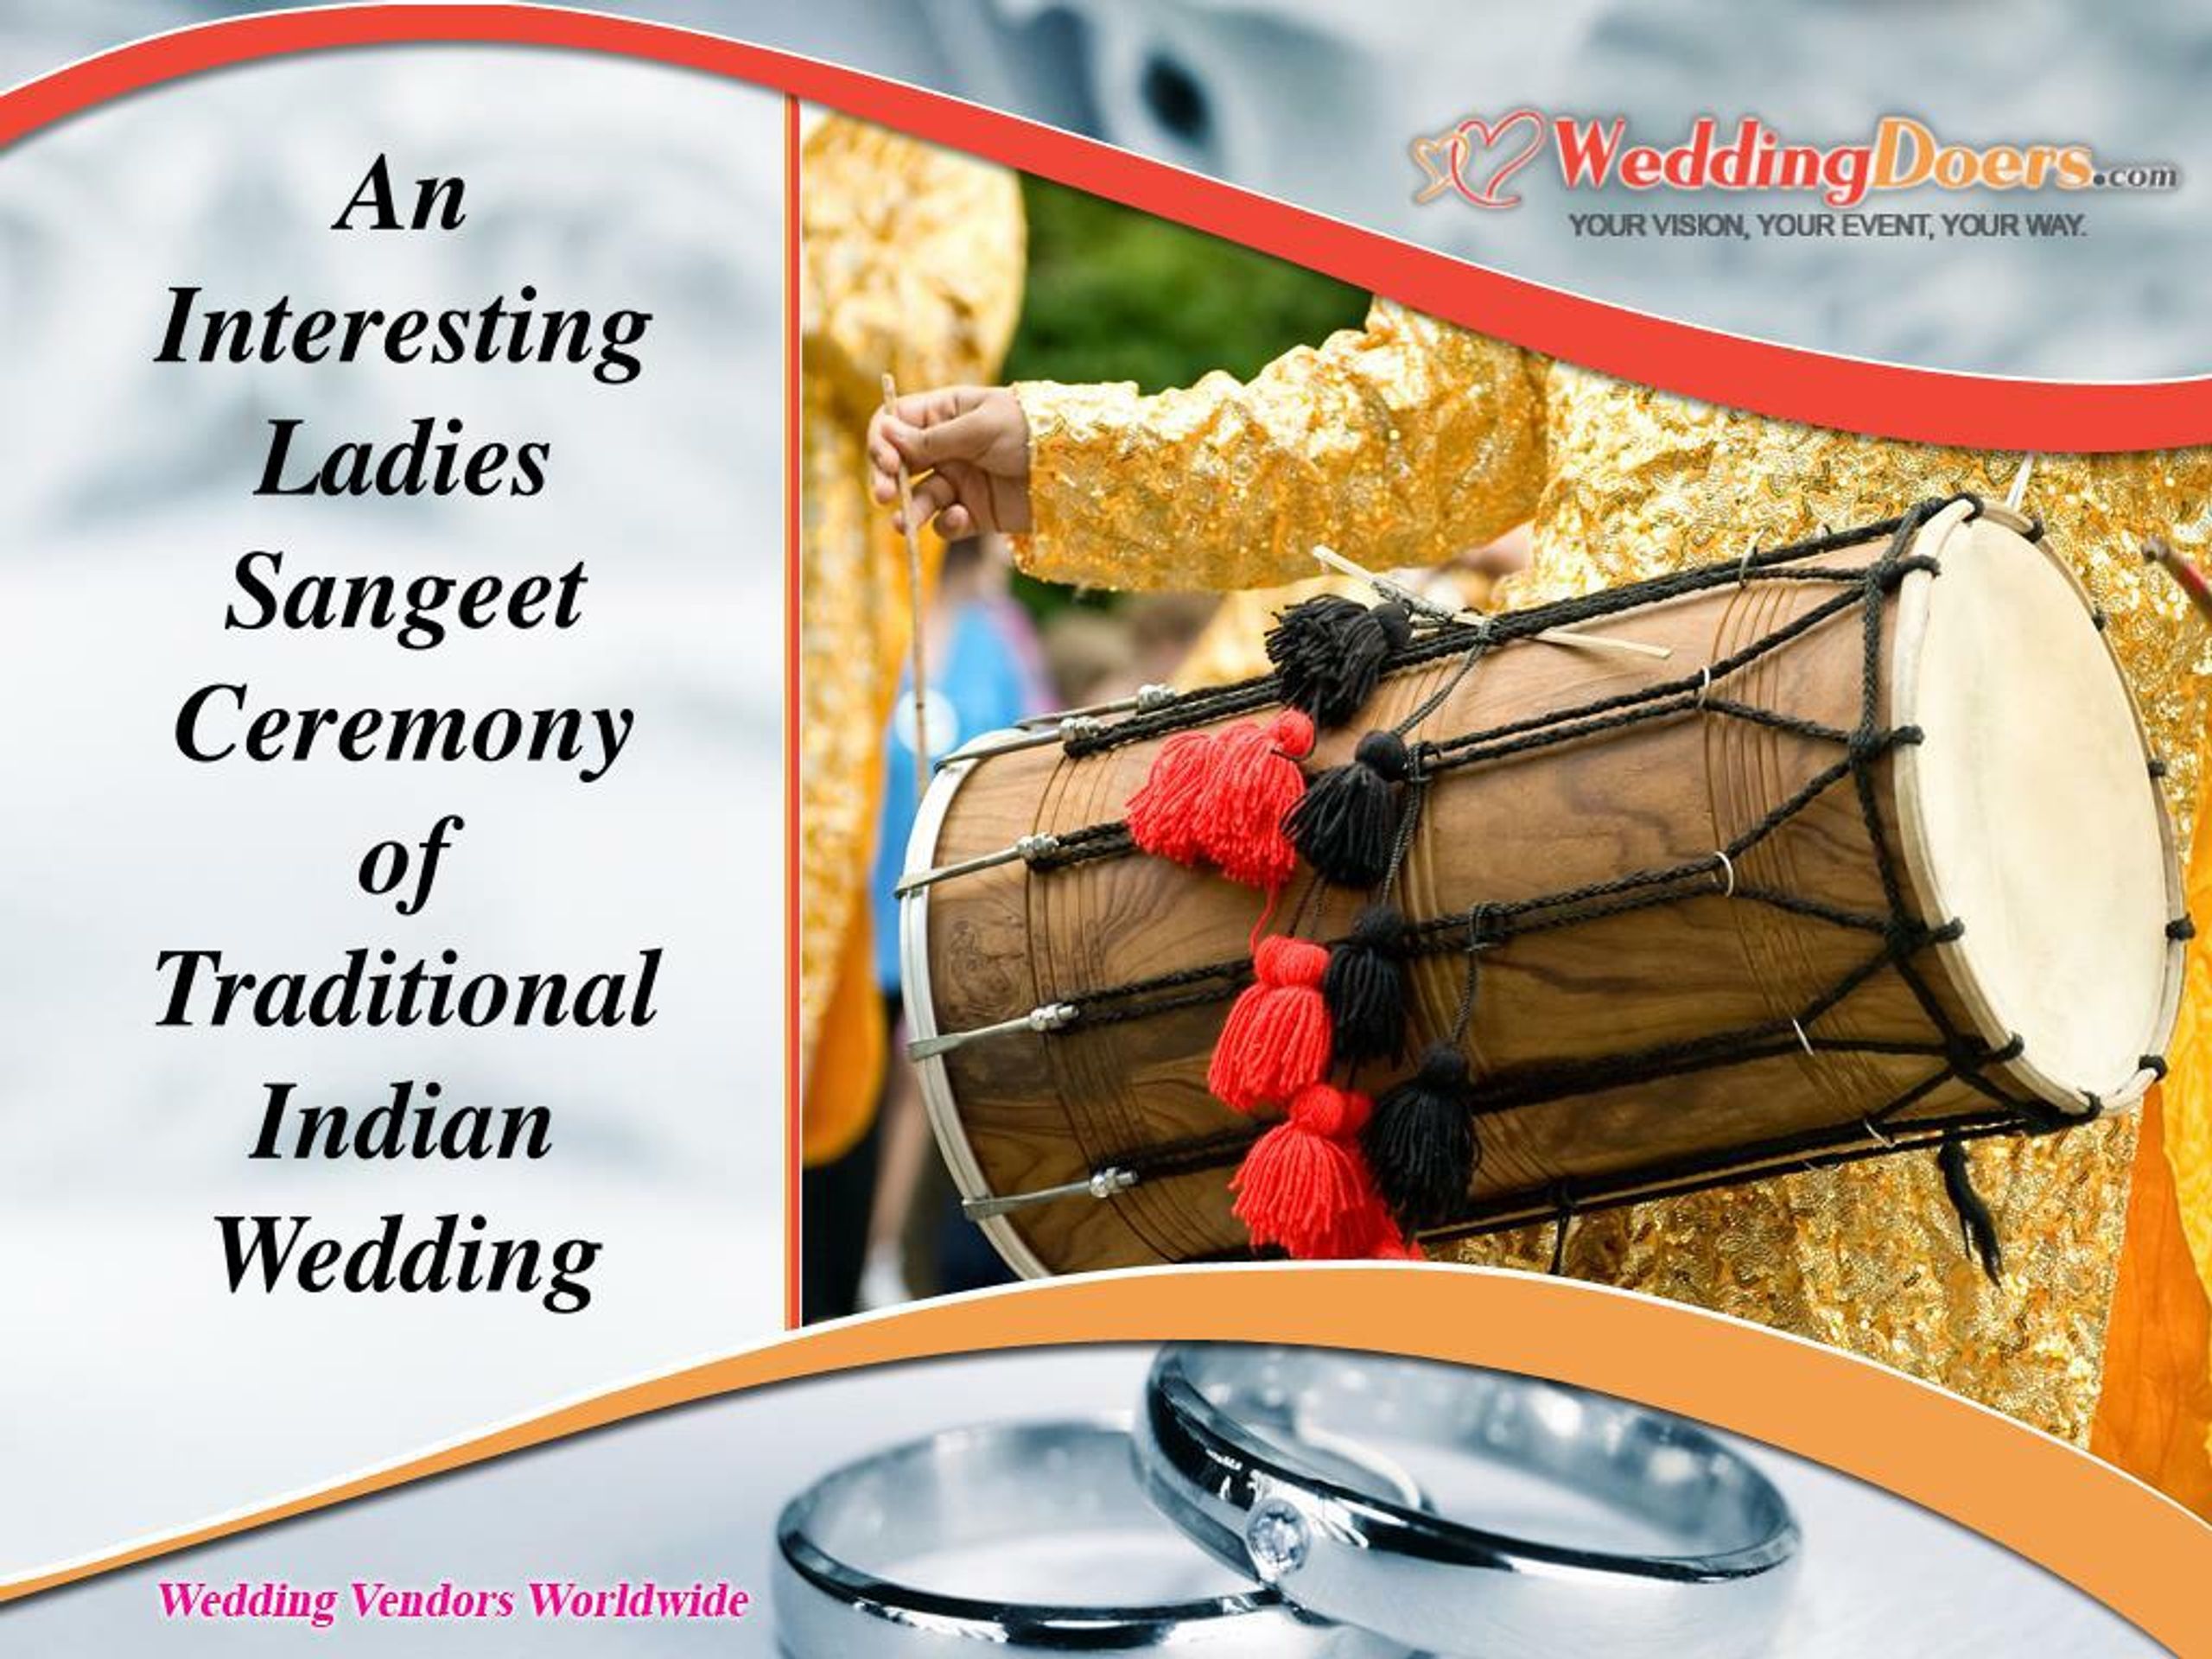 PPT - An Interesting Ladies Sangeet Ceremony of Traditional Indian Wedding  PowerPoint Presentation - ID:7437668